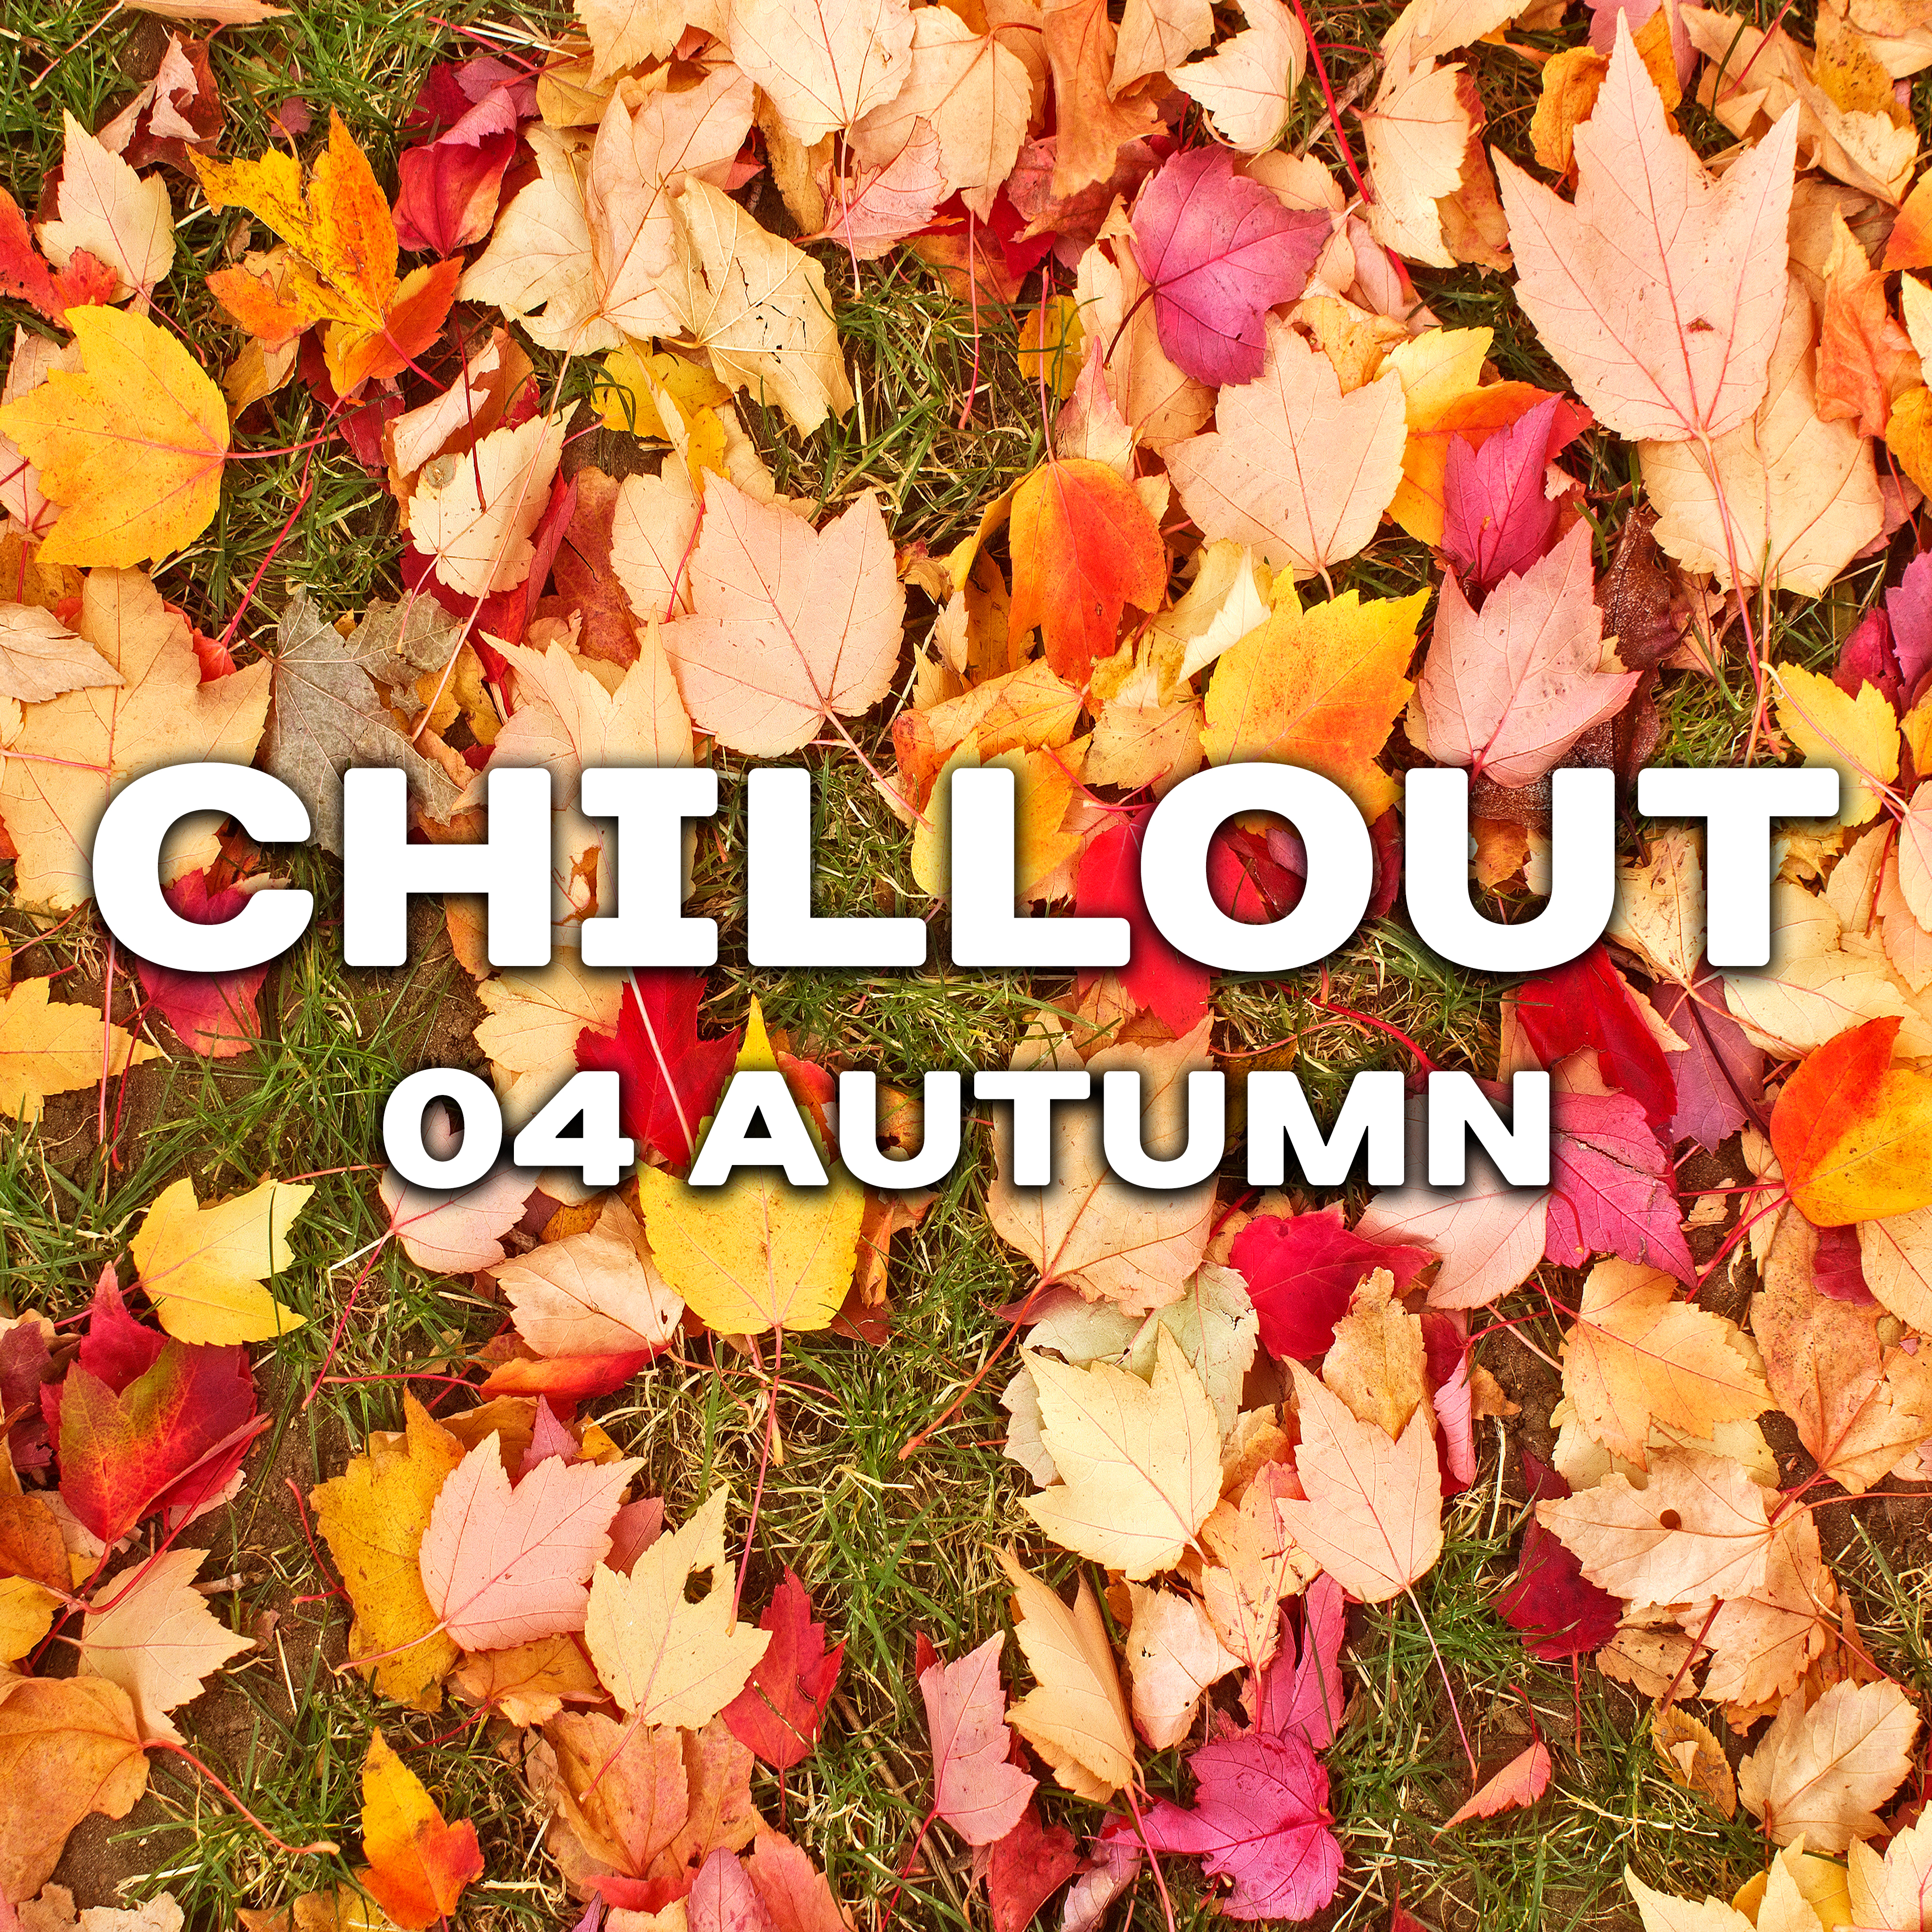 Chillout 04 Autumn – Relaxing Chill Out Music, Autumn 2017, Ambient Lounge